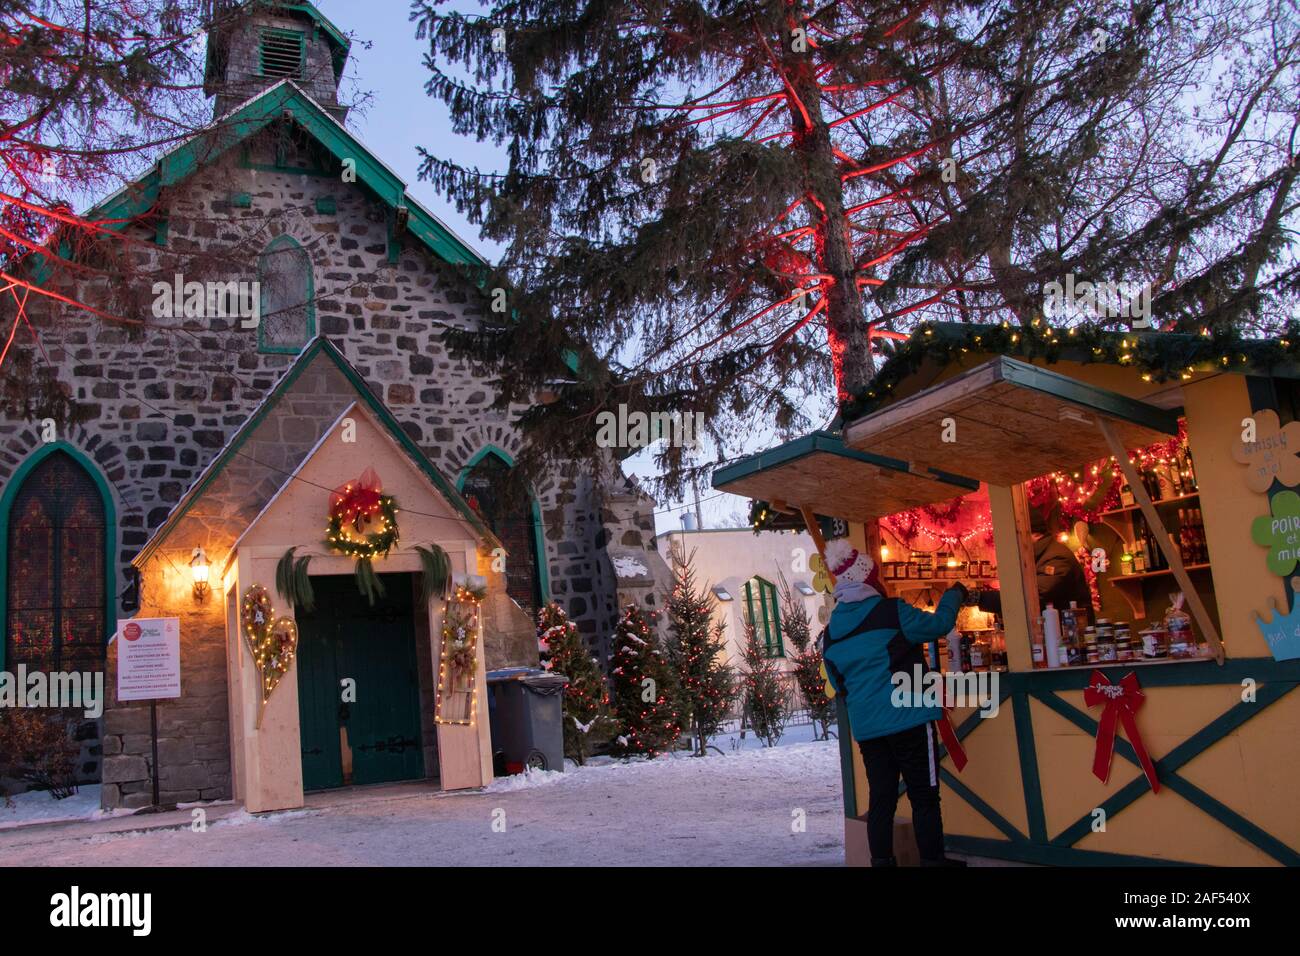 Longueuil, Québec, Canada - December 7, 2019: Christmas Market Stand in front St Mark's Anglican Church, Montérégie region Stock Photo